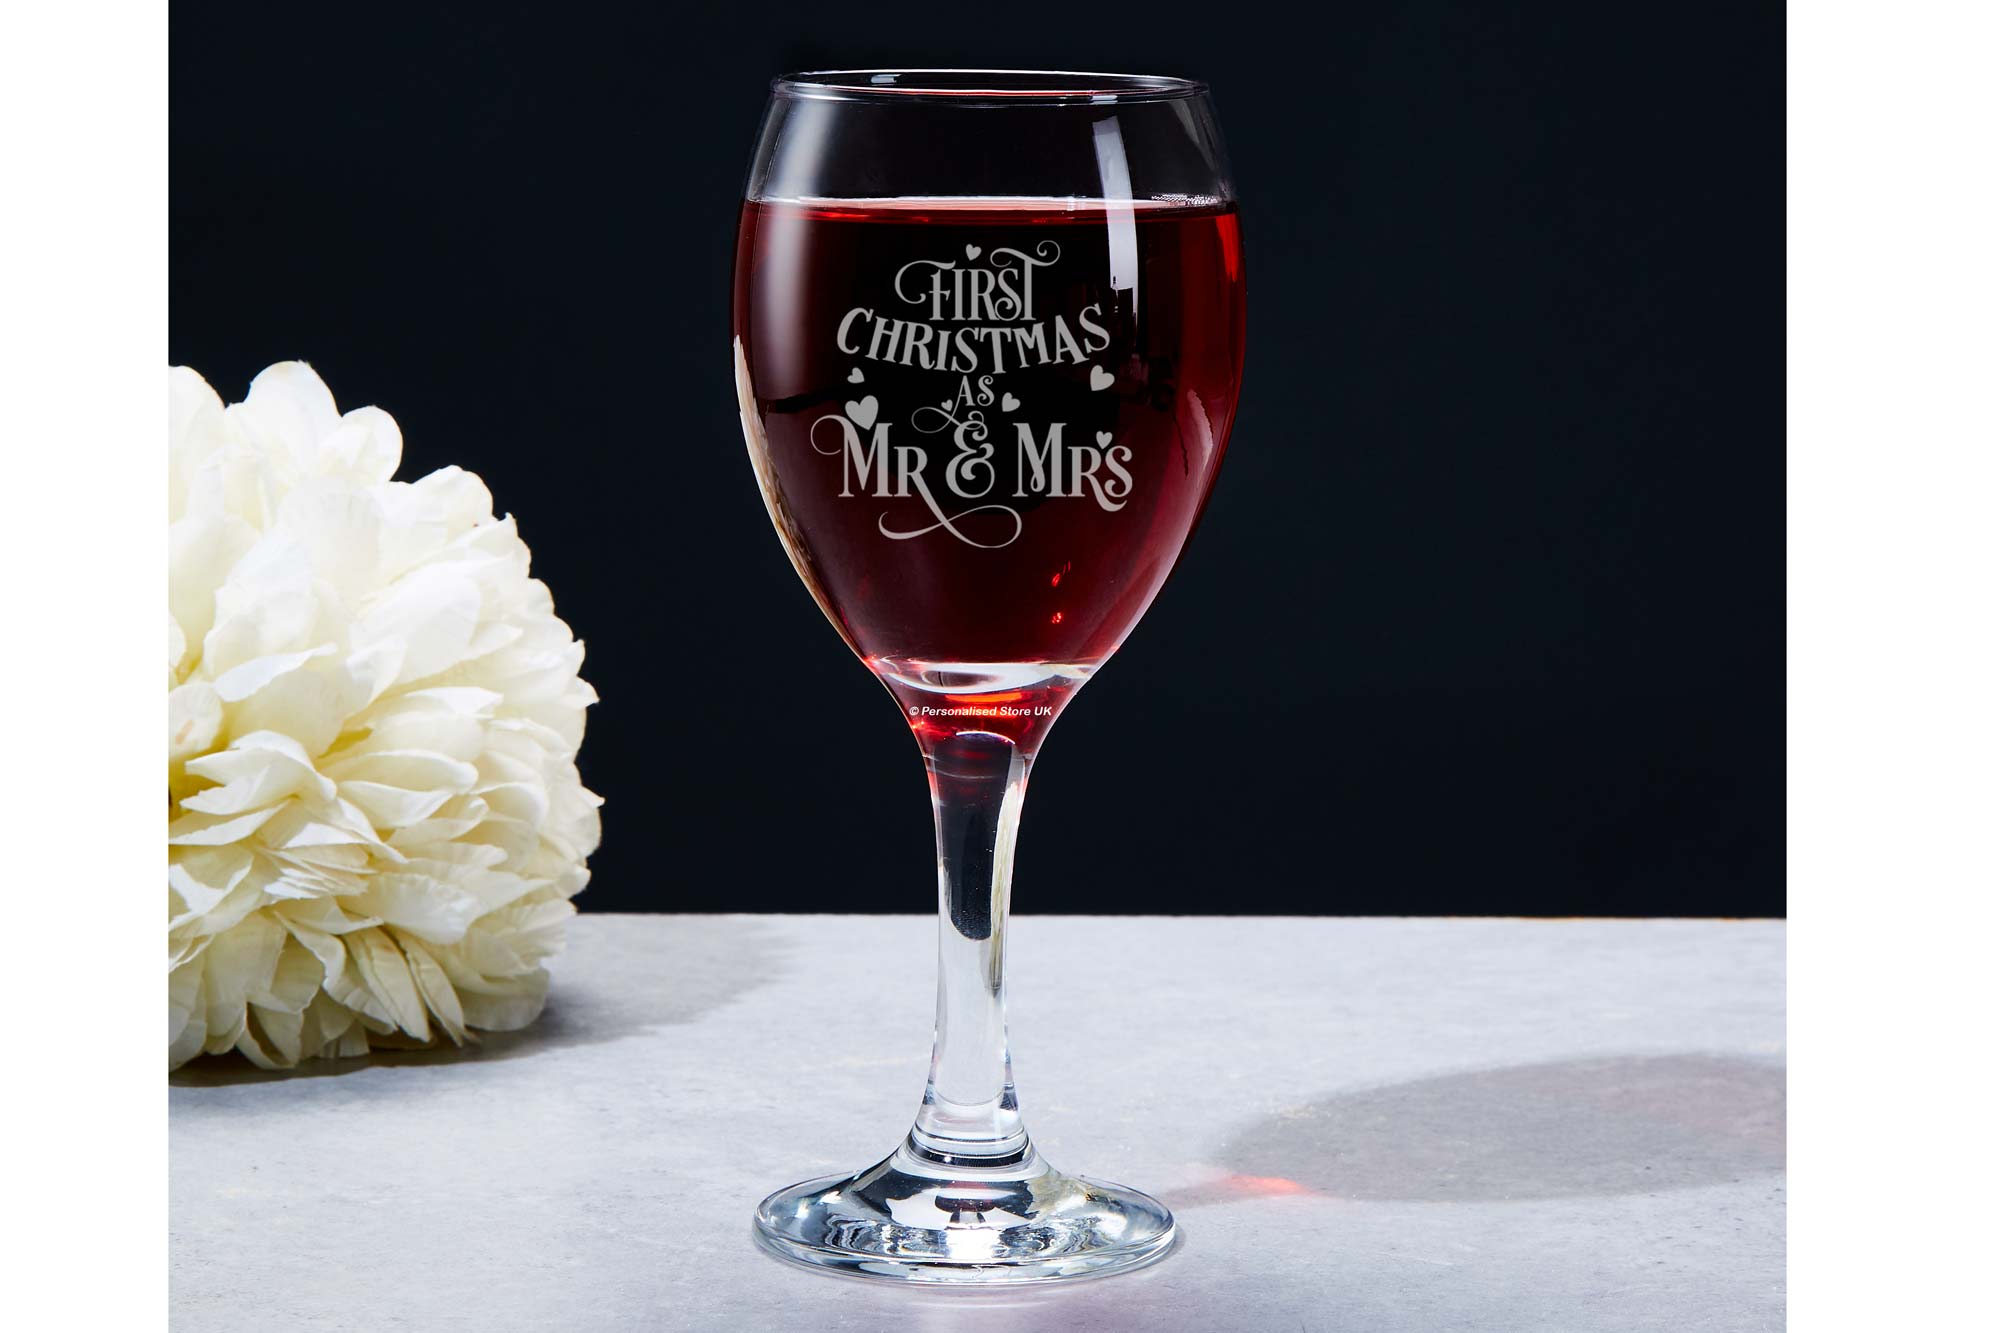 Engraved wine glass for professional Use and Featuring a Beautiful Festive Christmas inspired design. First Christmas as MR & MRS Wine Glass